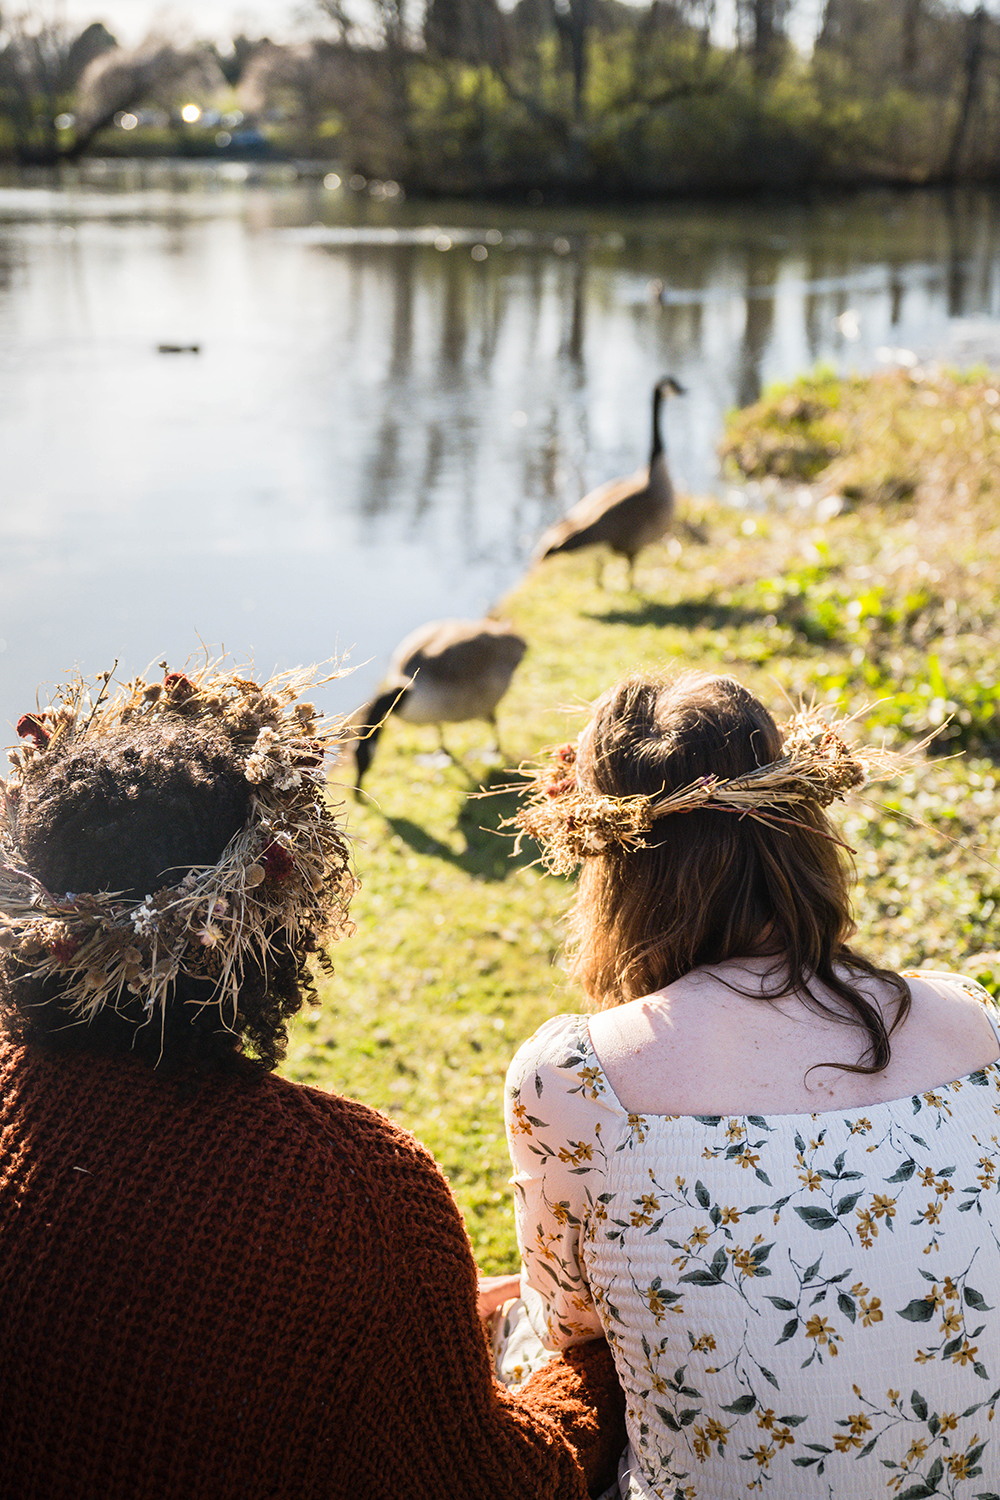 An LGBTQ+ couple crouches in front of two geese and observe them while holding onto one another.